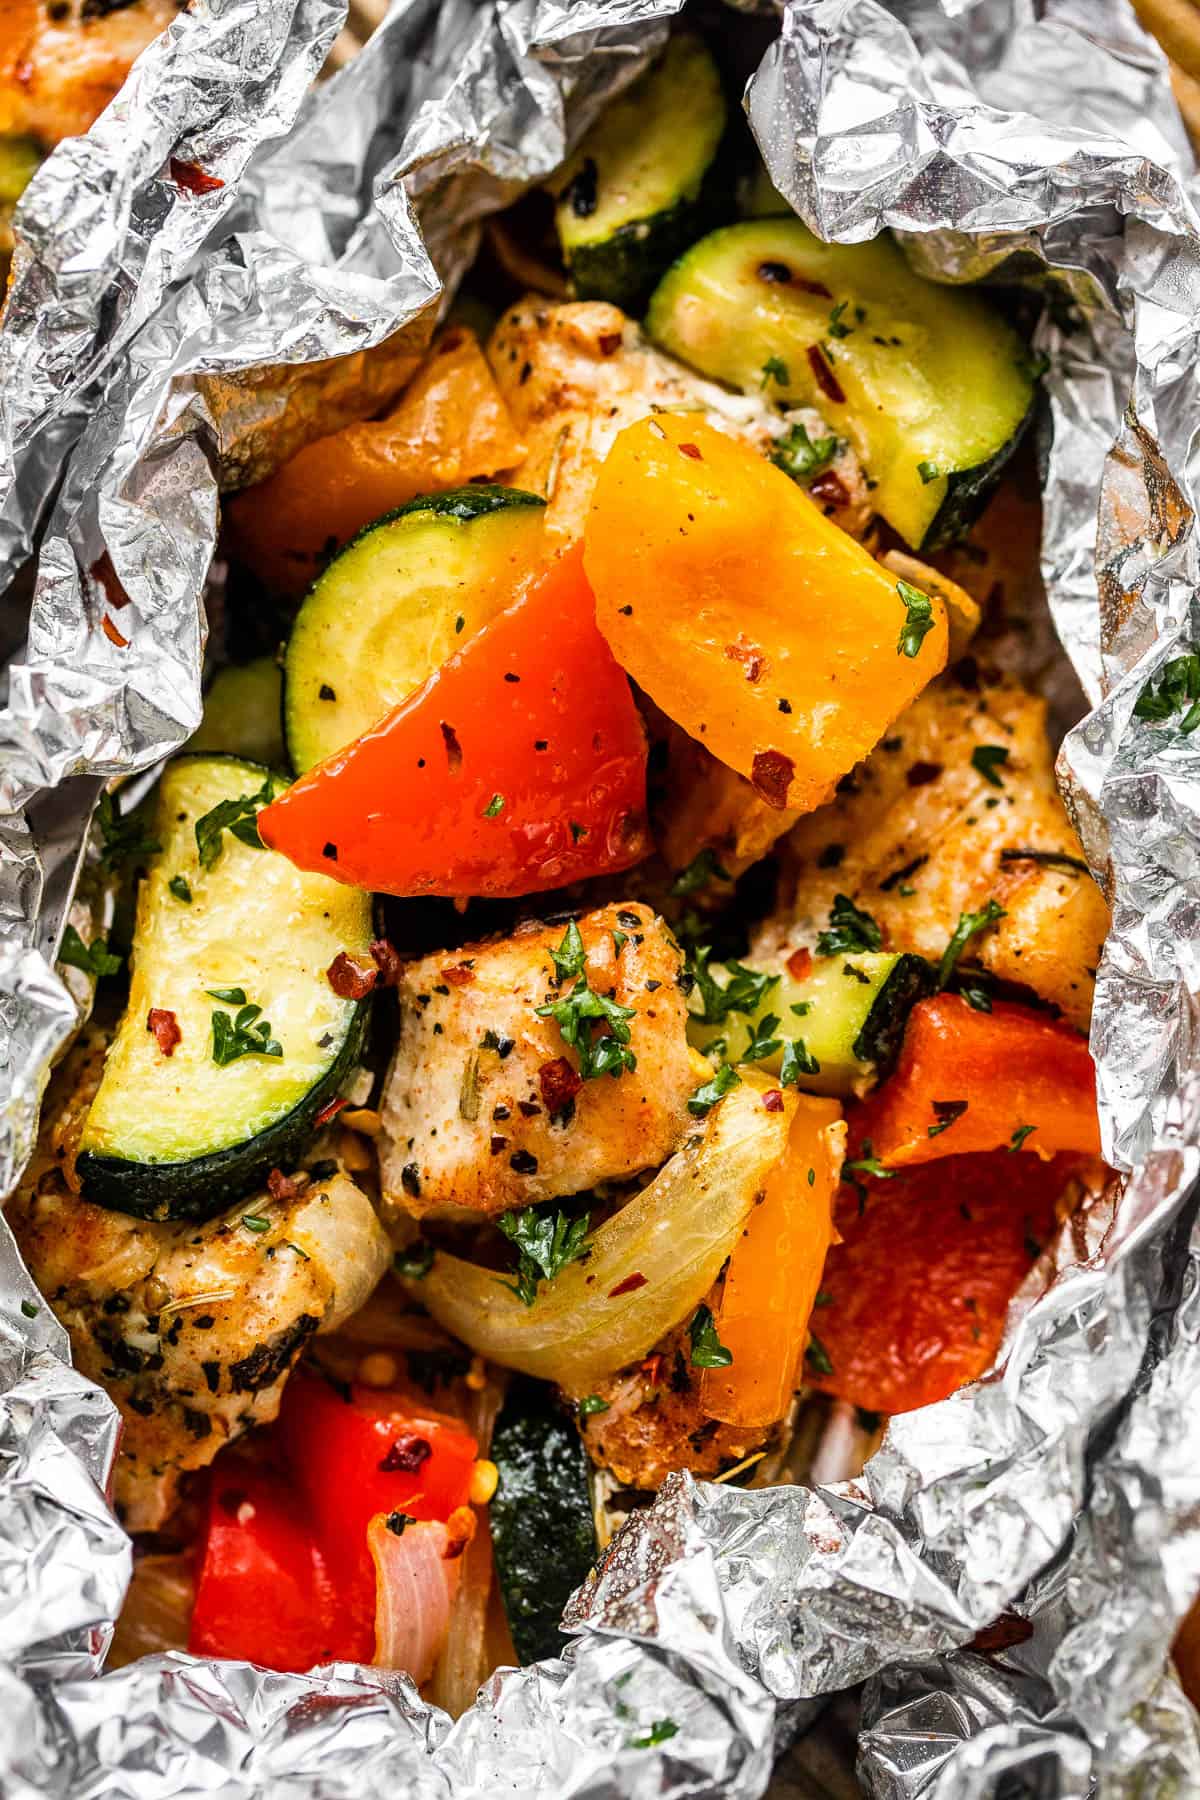 Chicken and Vegetables in Foil Packs - campfire recipes